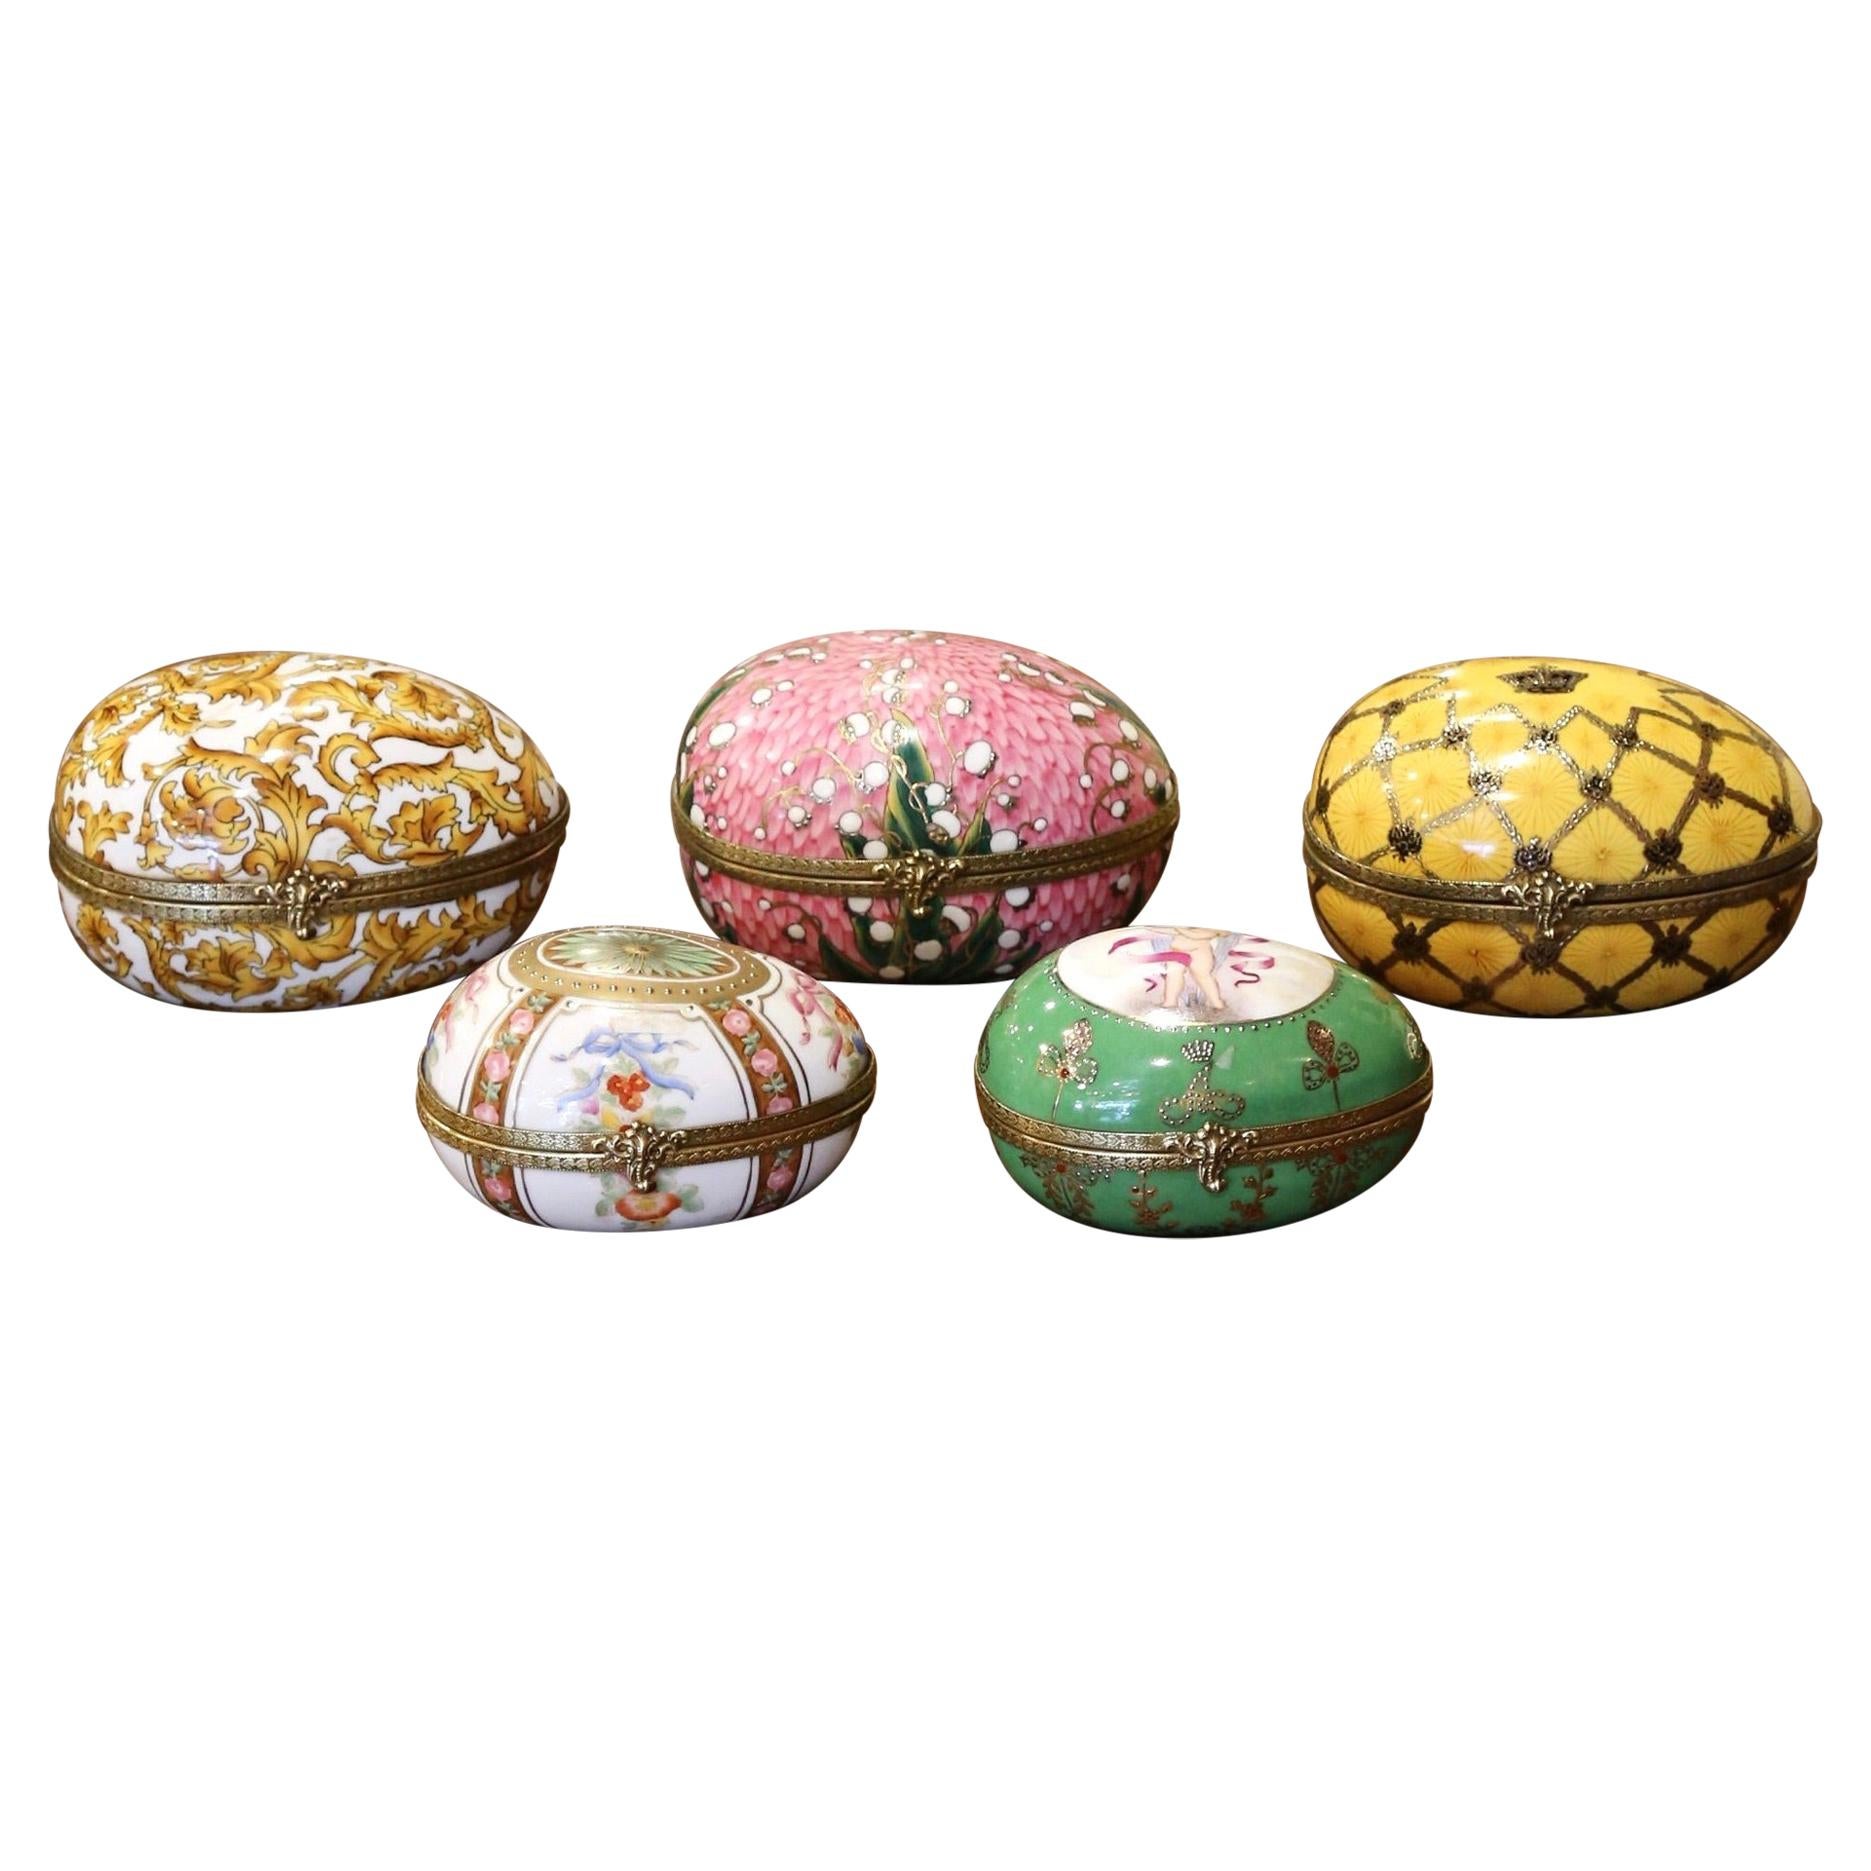 19th Century French Painted Faberge Porcelain Egg Trinket Boxes, Set of 5